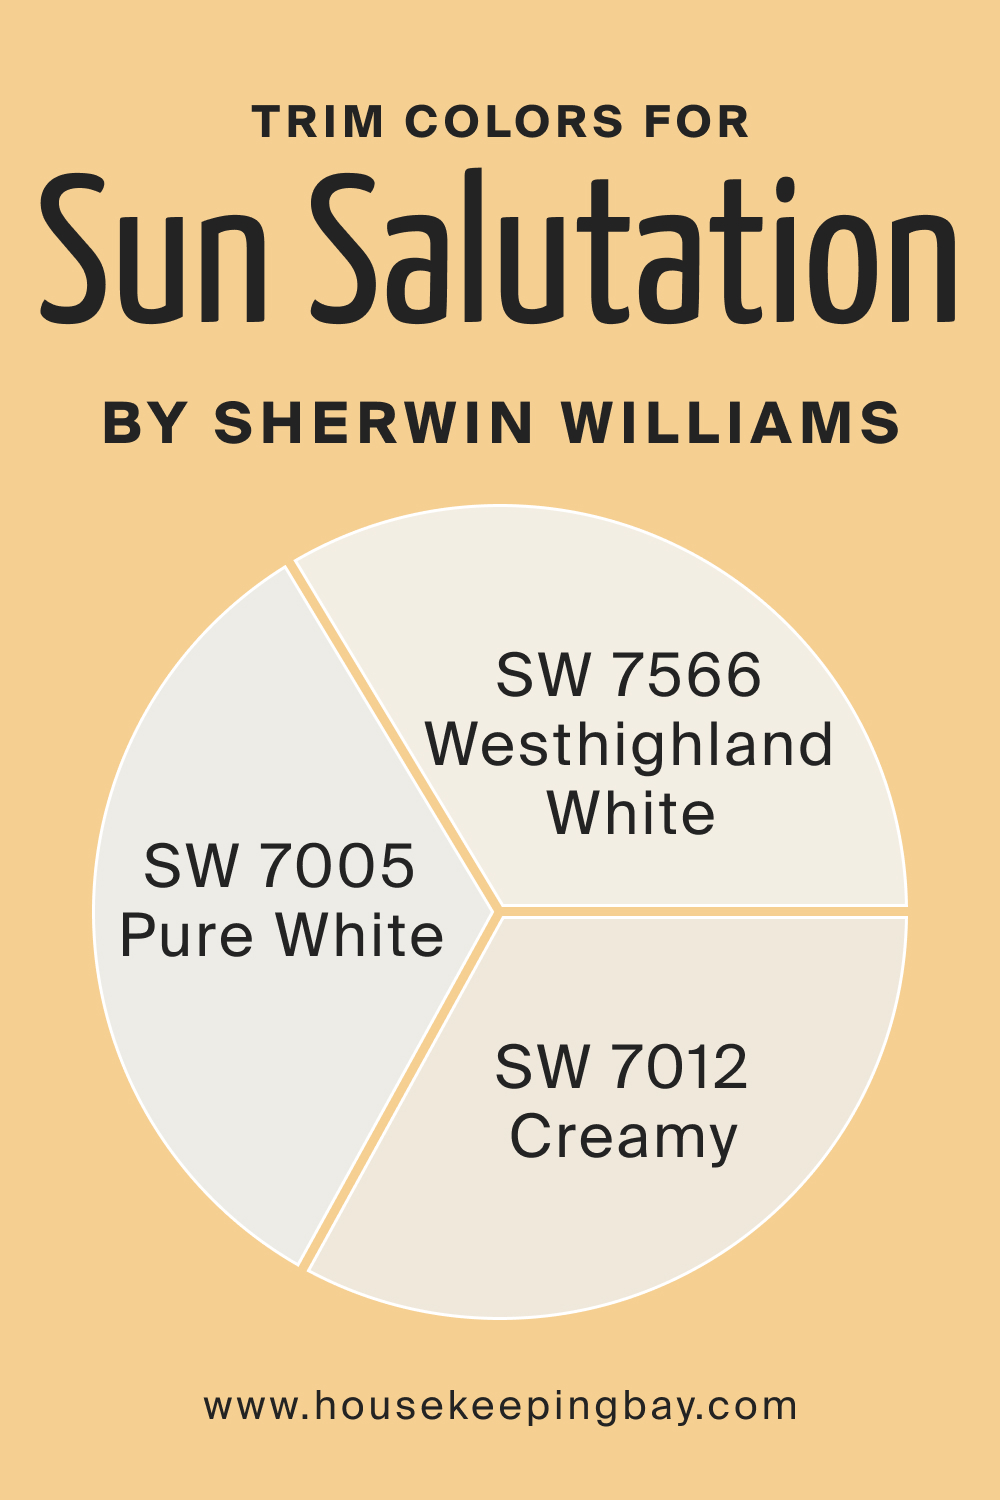 Trim Colors of Sun Salutation SW 9664 by Sherwin Williams